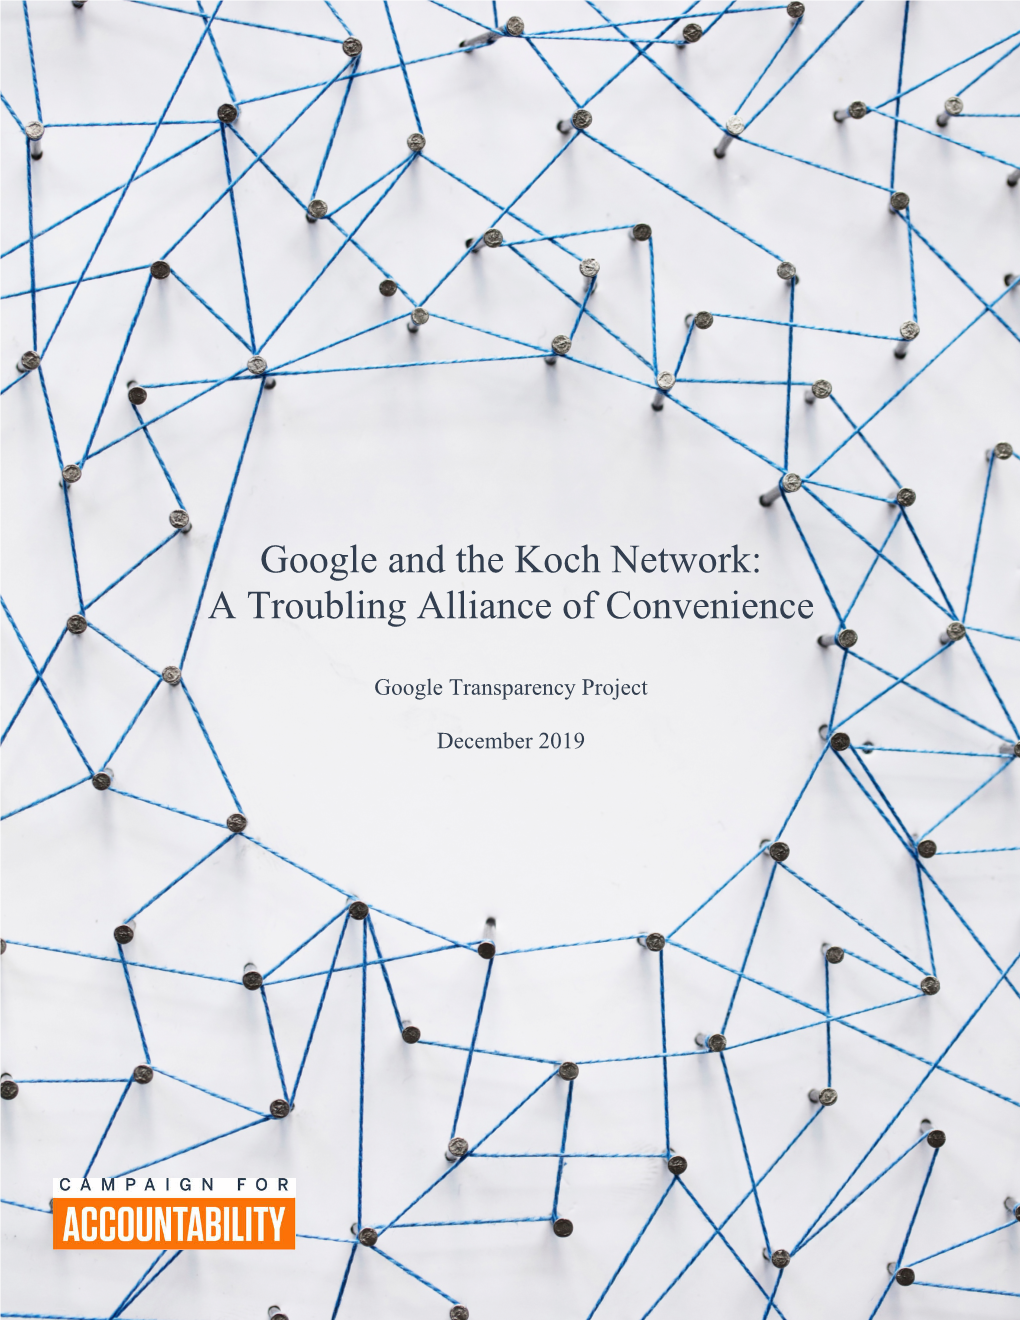 Google and the Koch Network: a Troubling Alliance of Convenience